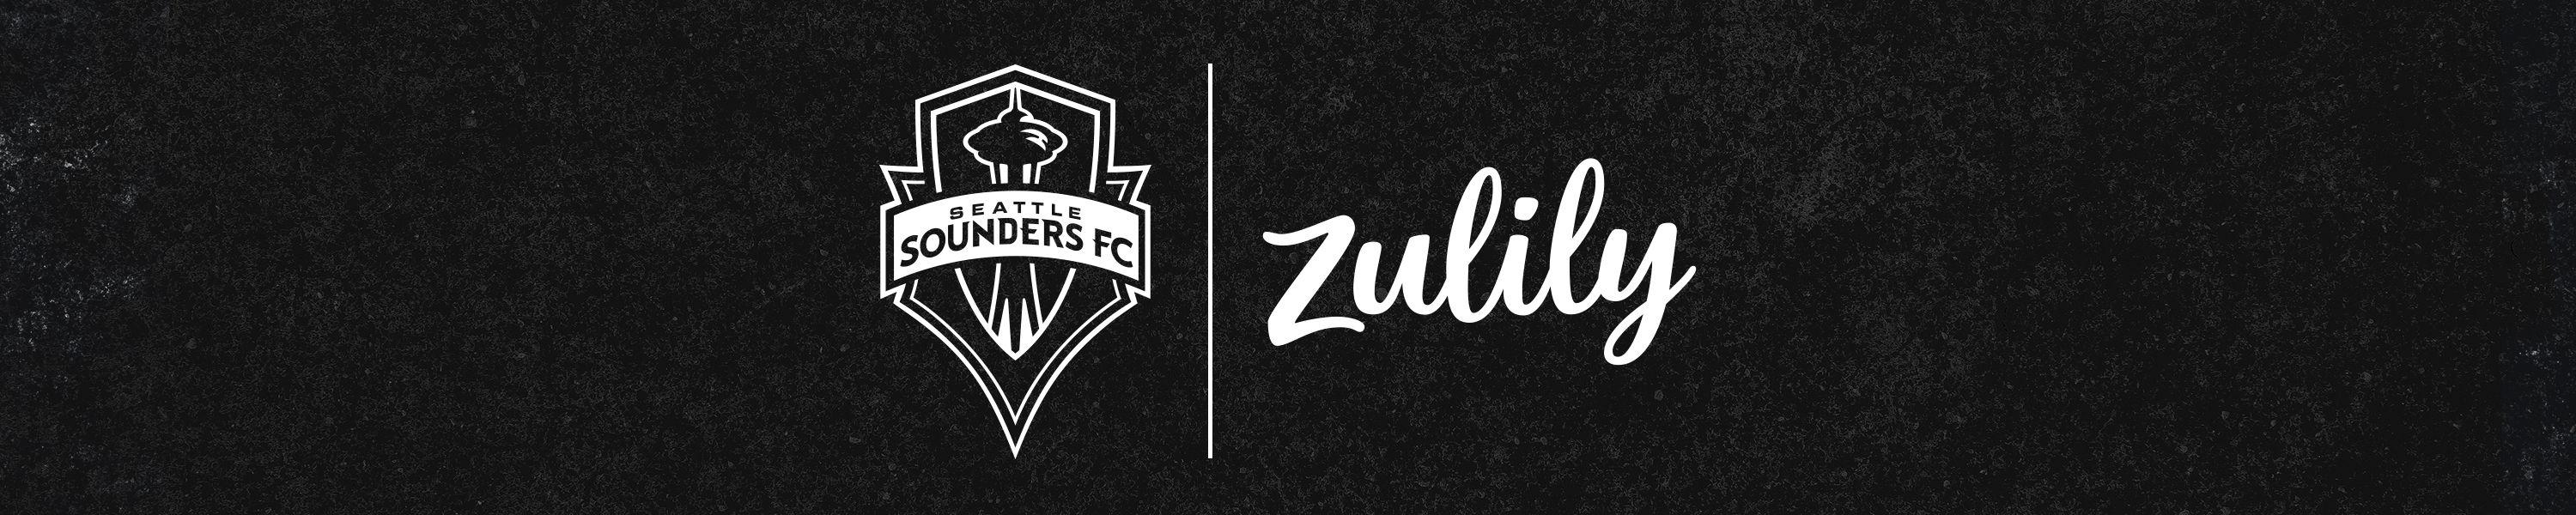 Zulily Logo - Zulily is the Official Jersey Partner of Sounders FC | Seattle ...